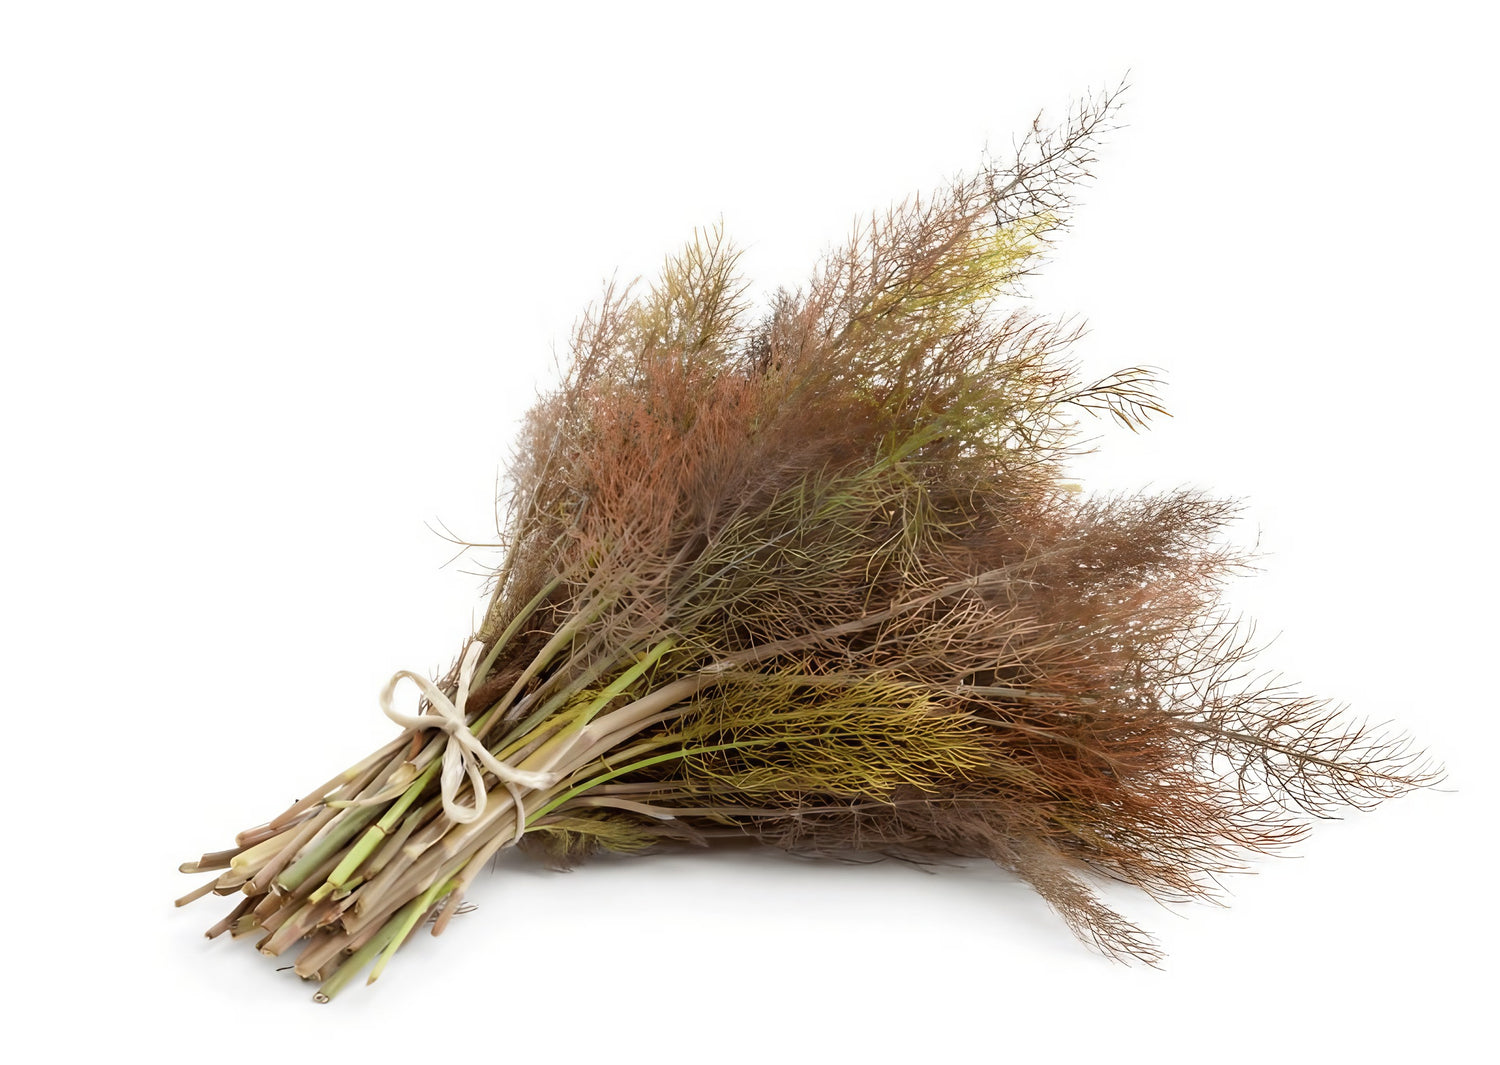 Dried Bronze Fennel stems arranged against a white backdrop